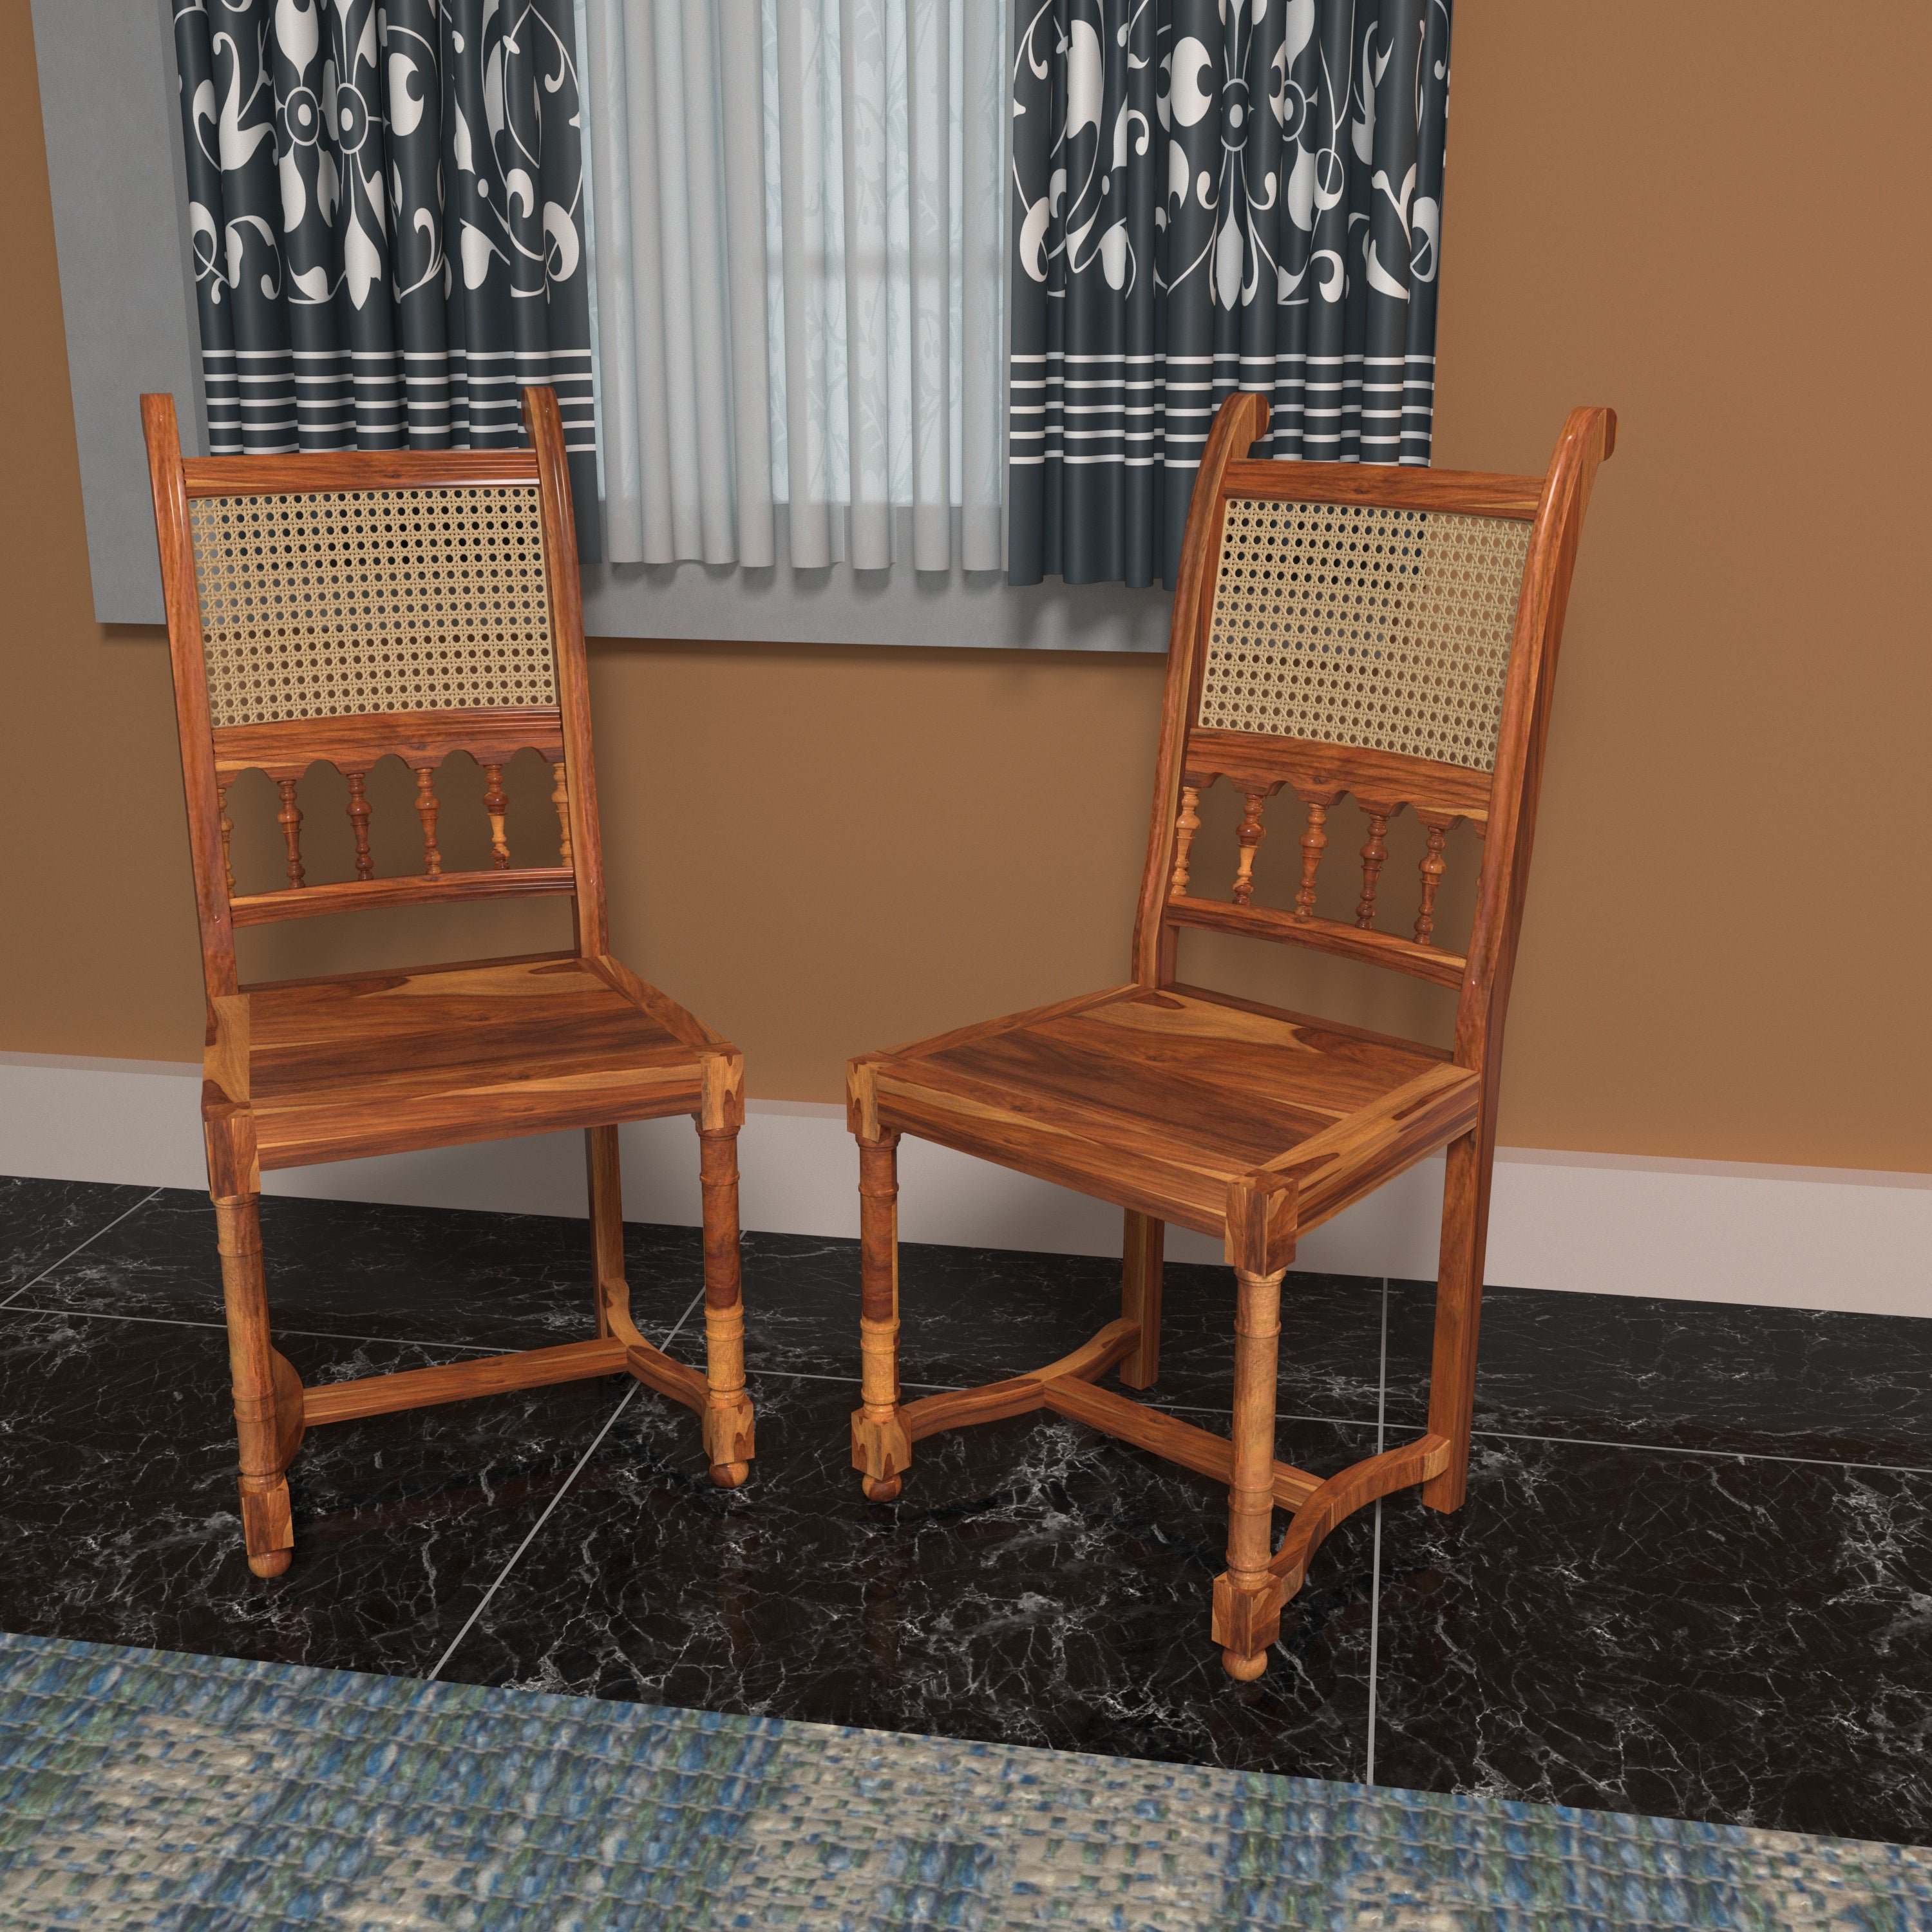 Classic Handmade Cane with Pillar Back Wooden Seating Chair Set of 2 Dining Chair